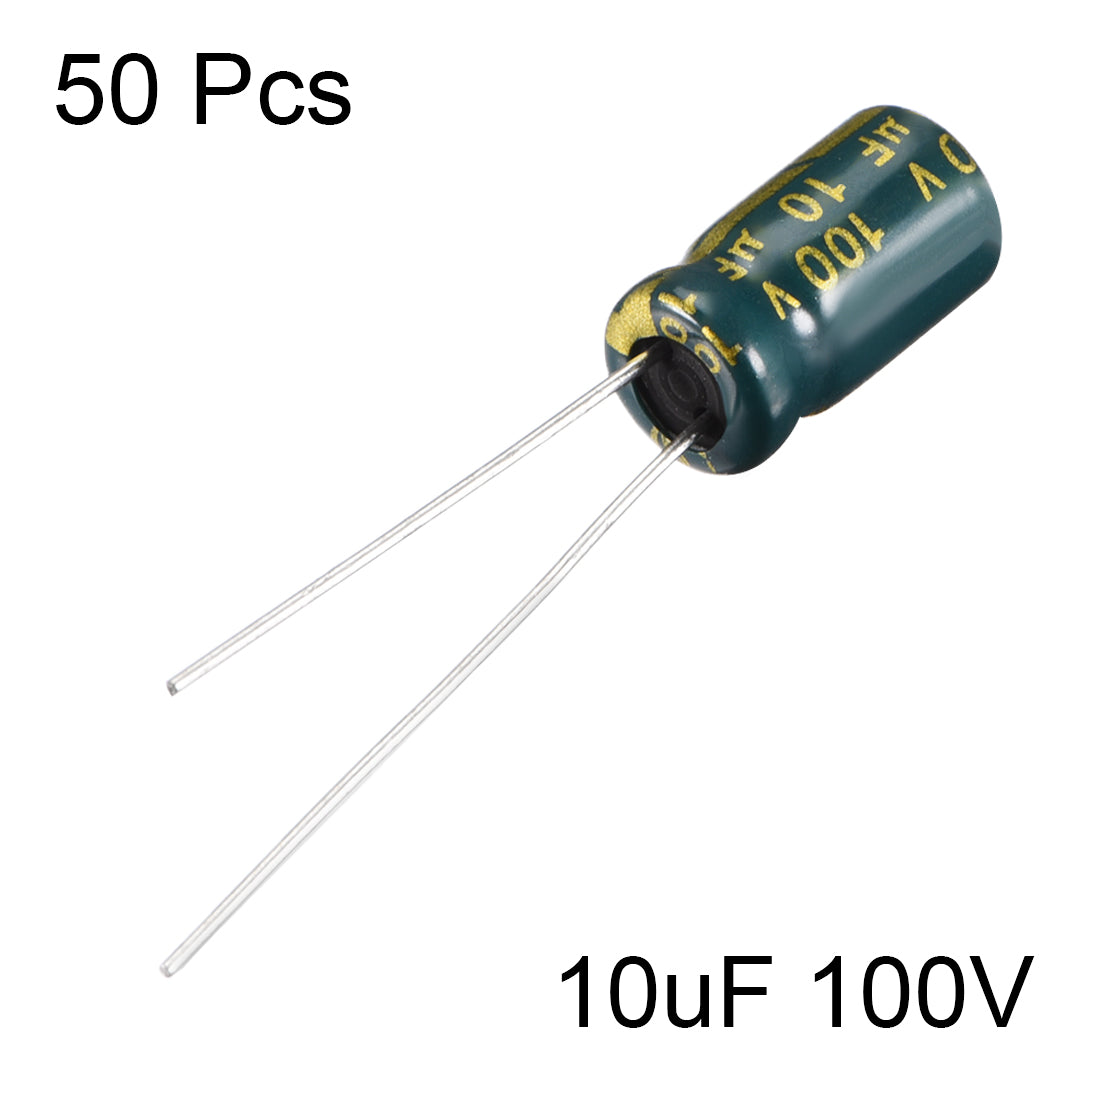 uxcell Uxcell Aluminum Radial Electrolytic Capacitor Low ESR Green with 10uF 100V 105 Celsius Life 3000H 6.3 x 11 mm High Ripple Current,Low Impedance 50pcs